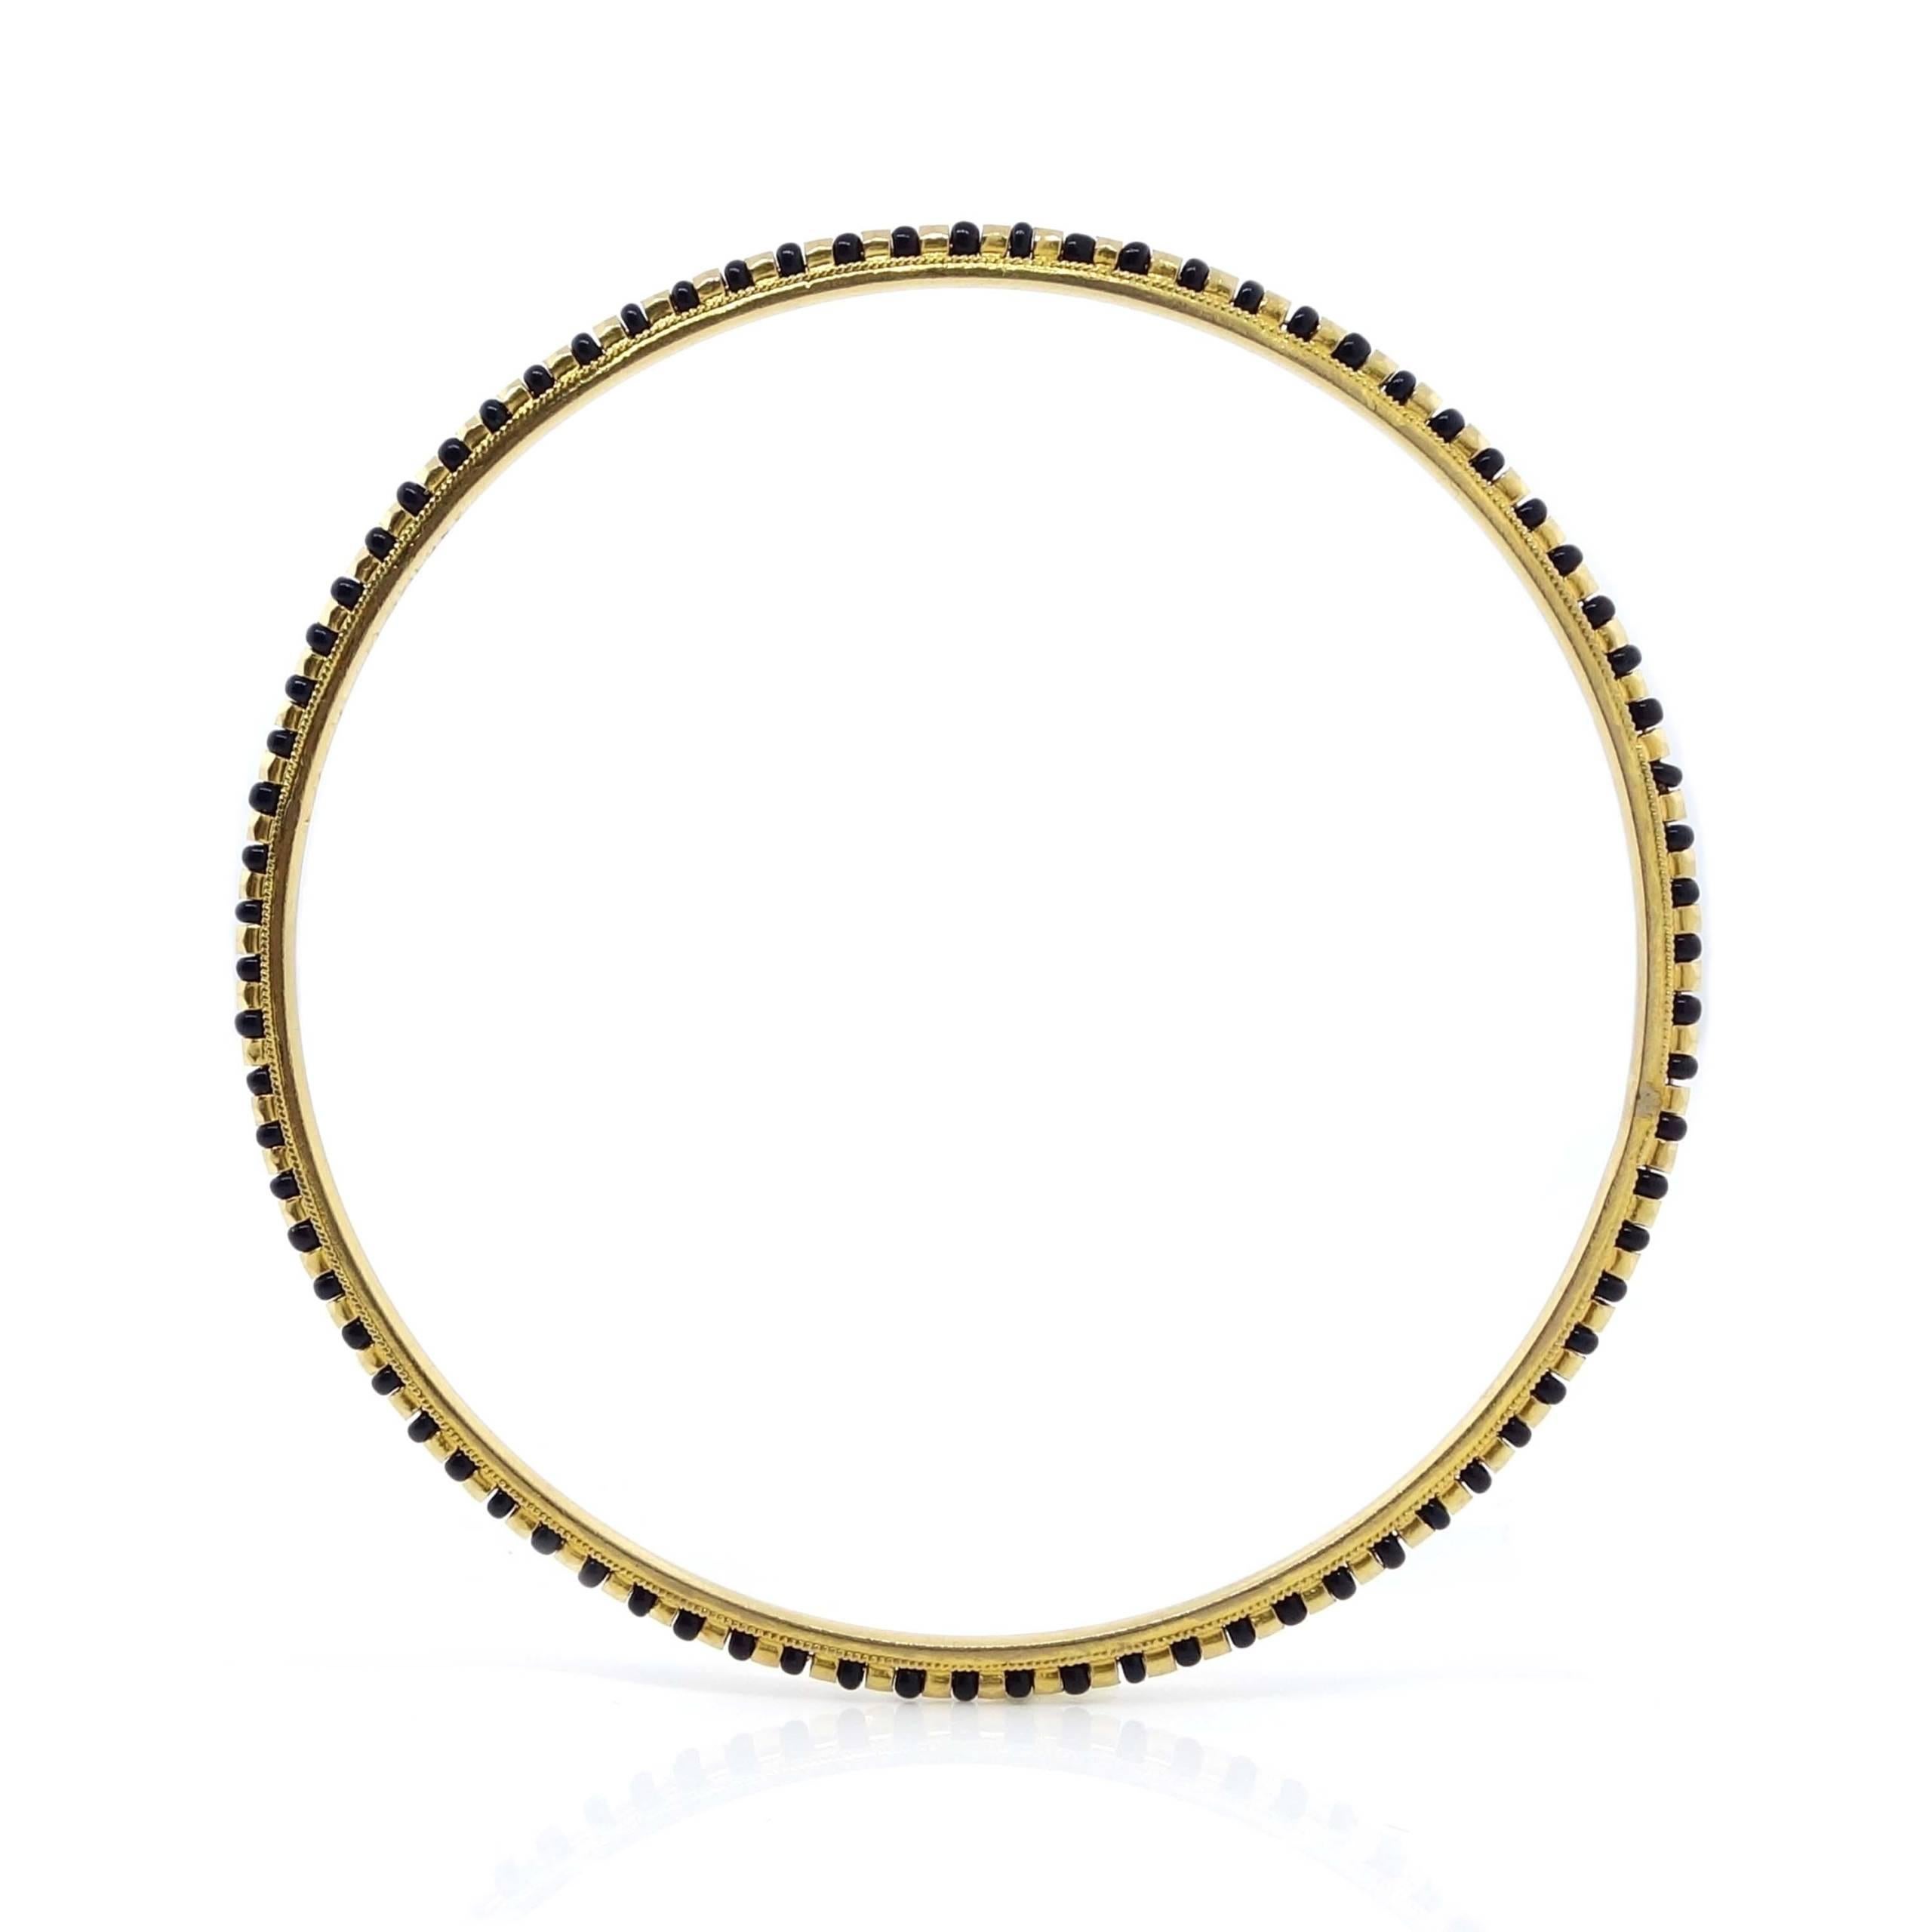 Onyx Bead Bangle Bracelets in 22k Yellow Gold In New Condition For Sale In Houston, TX